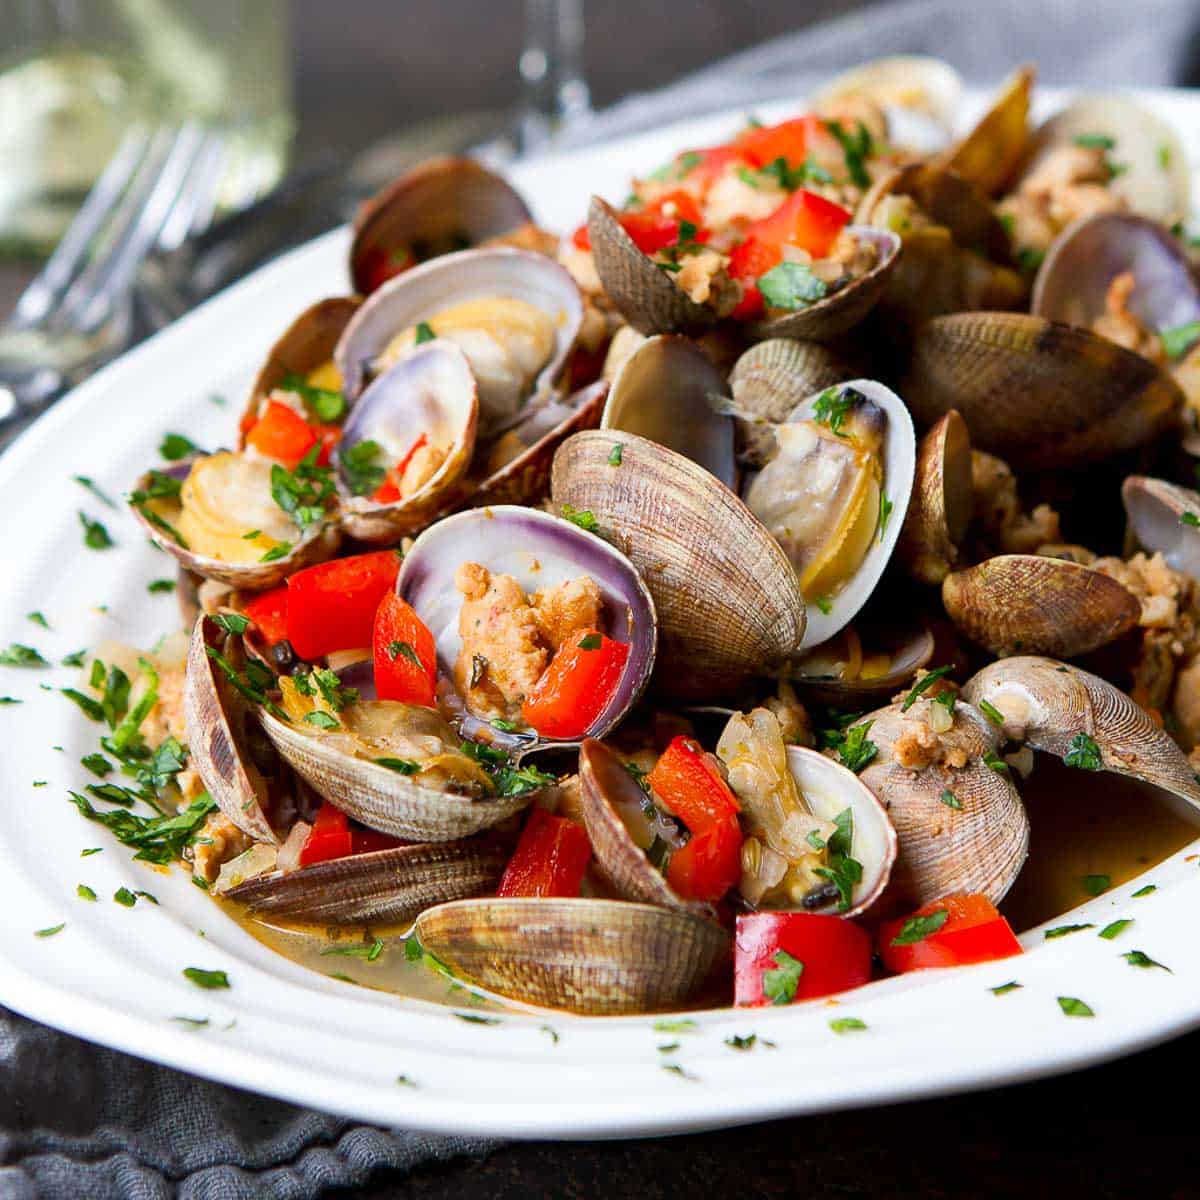 Steamed clams, sausage and red pepper in a white bowl.